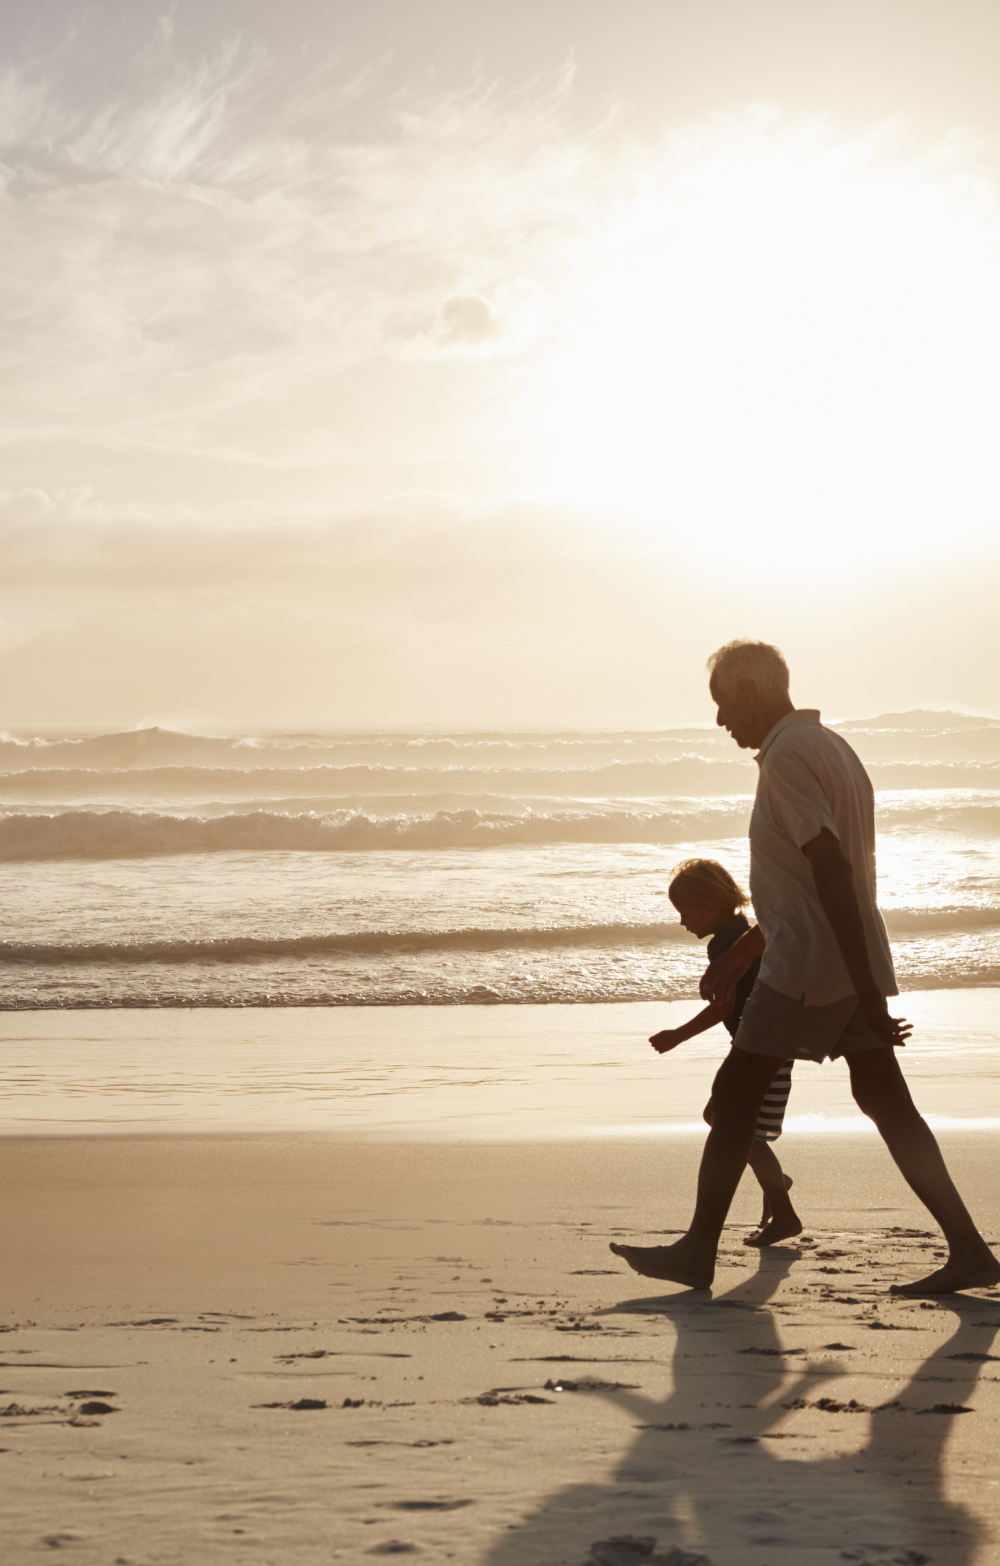 Grandfather with grandchild walking on a beach at sunset